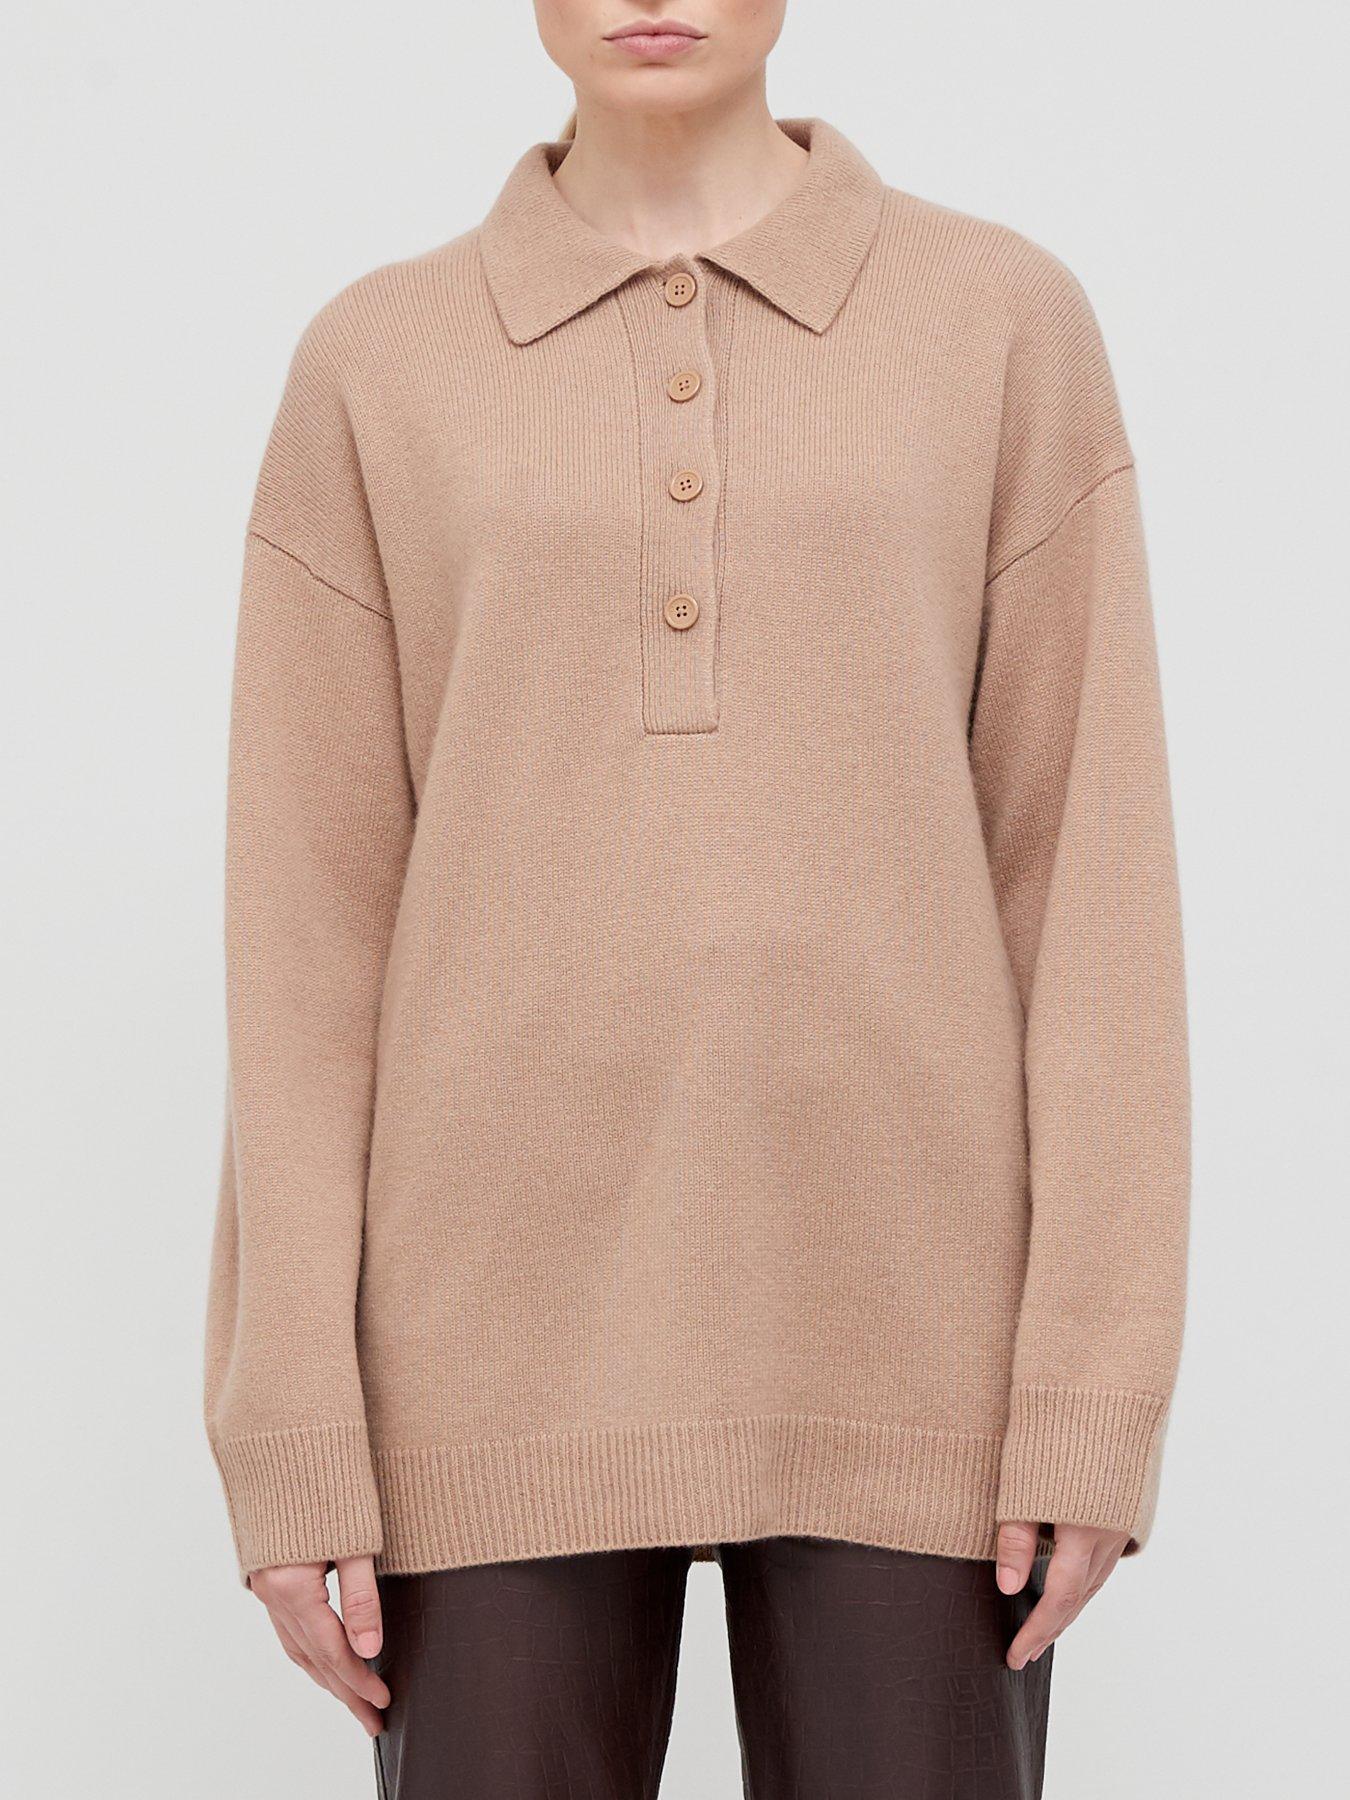 EQUIPMENT Lenna Oversized Cashmere Knitted Polo Jumper - Camel | very.co.uk